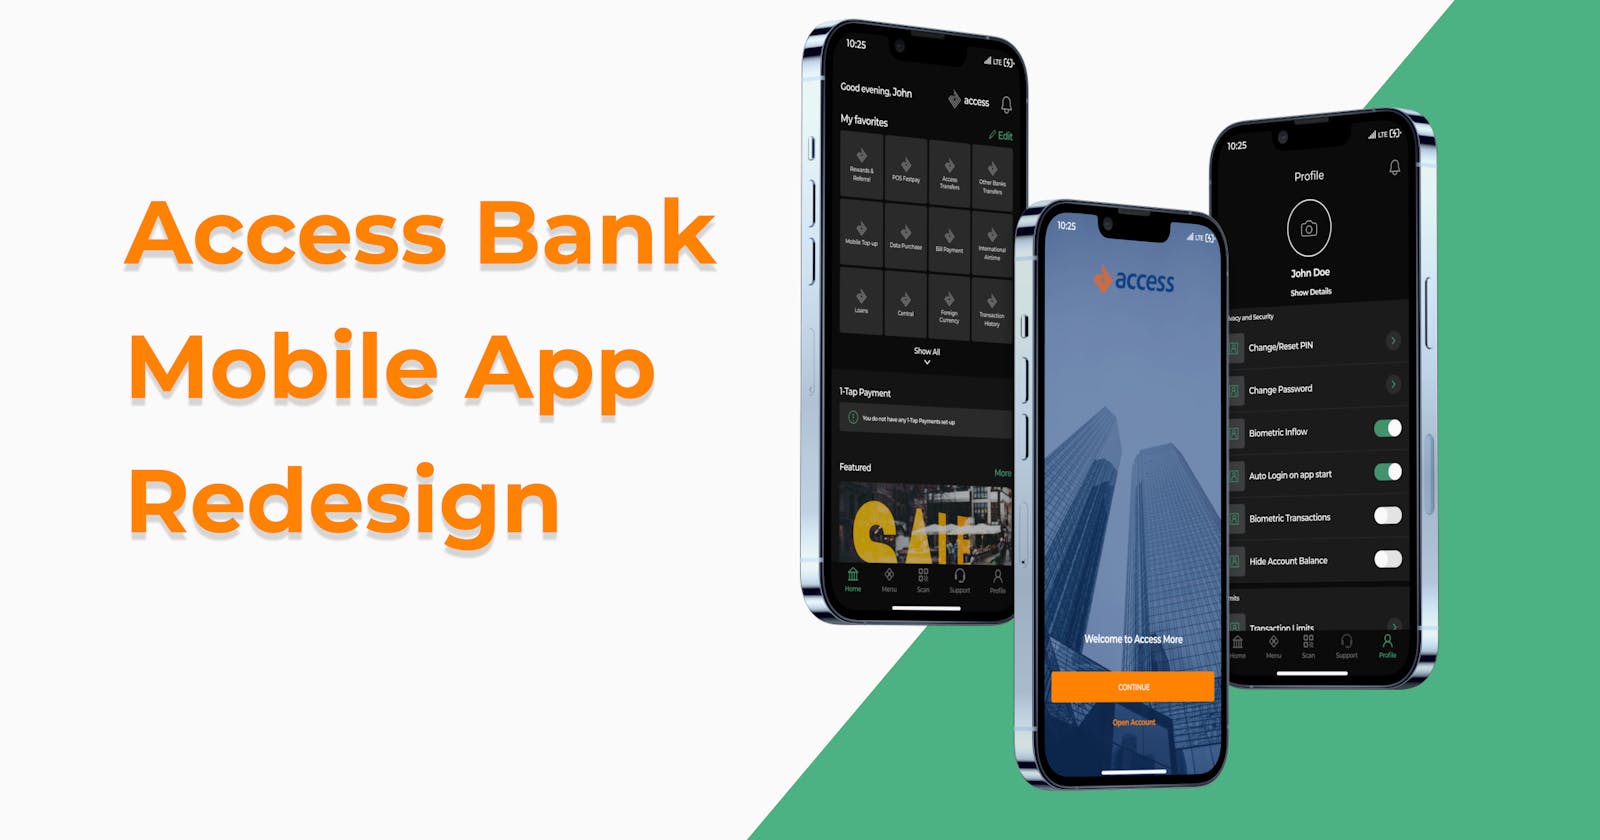 A Case Study Of Access Bank App With A New Feature